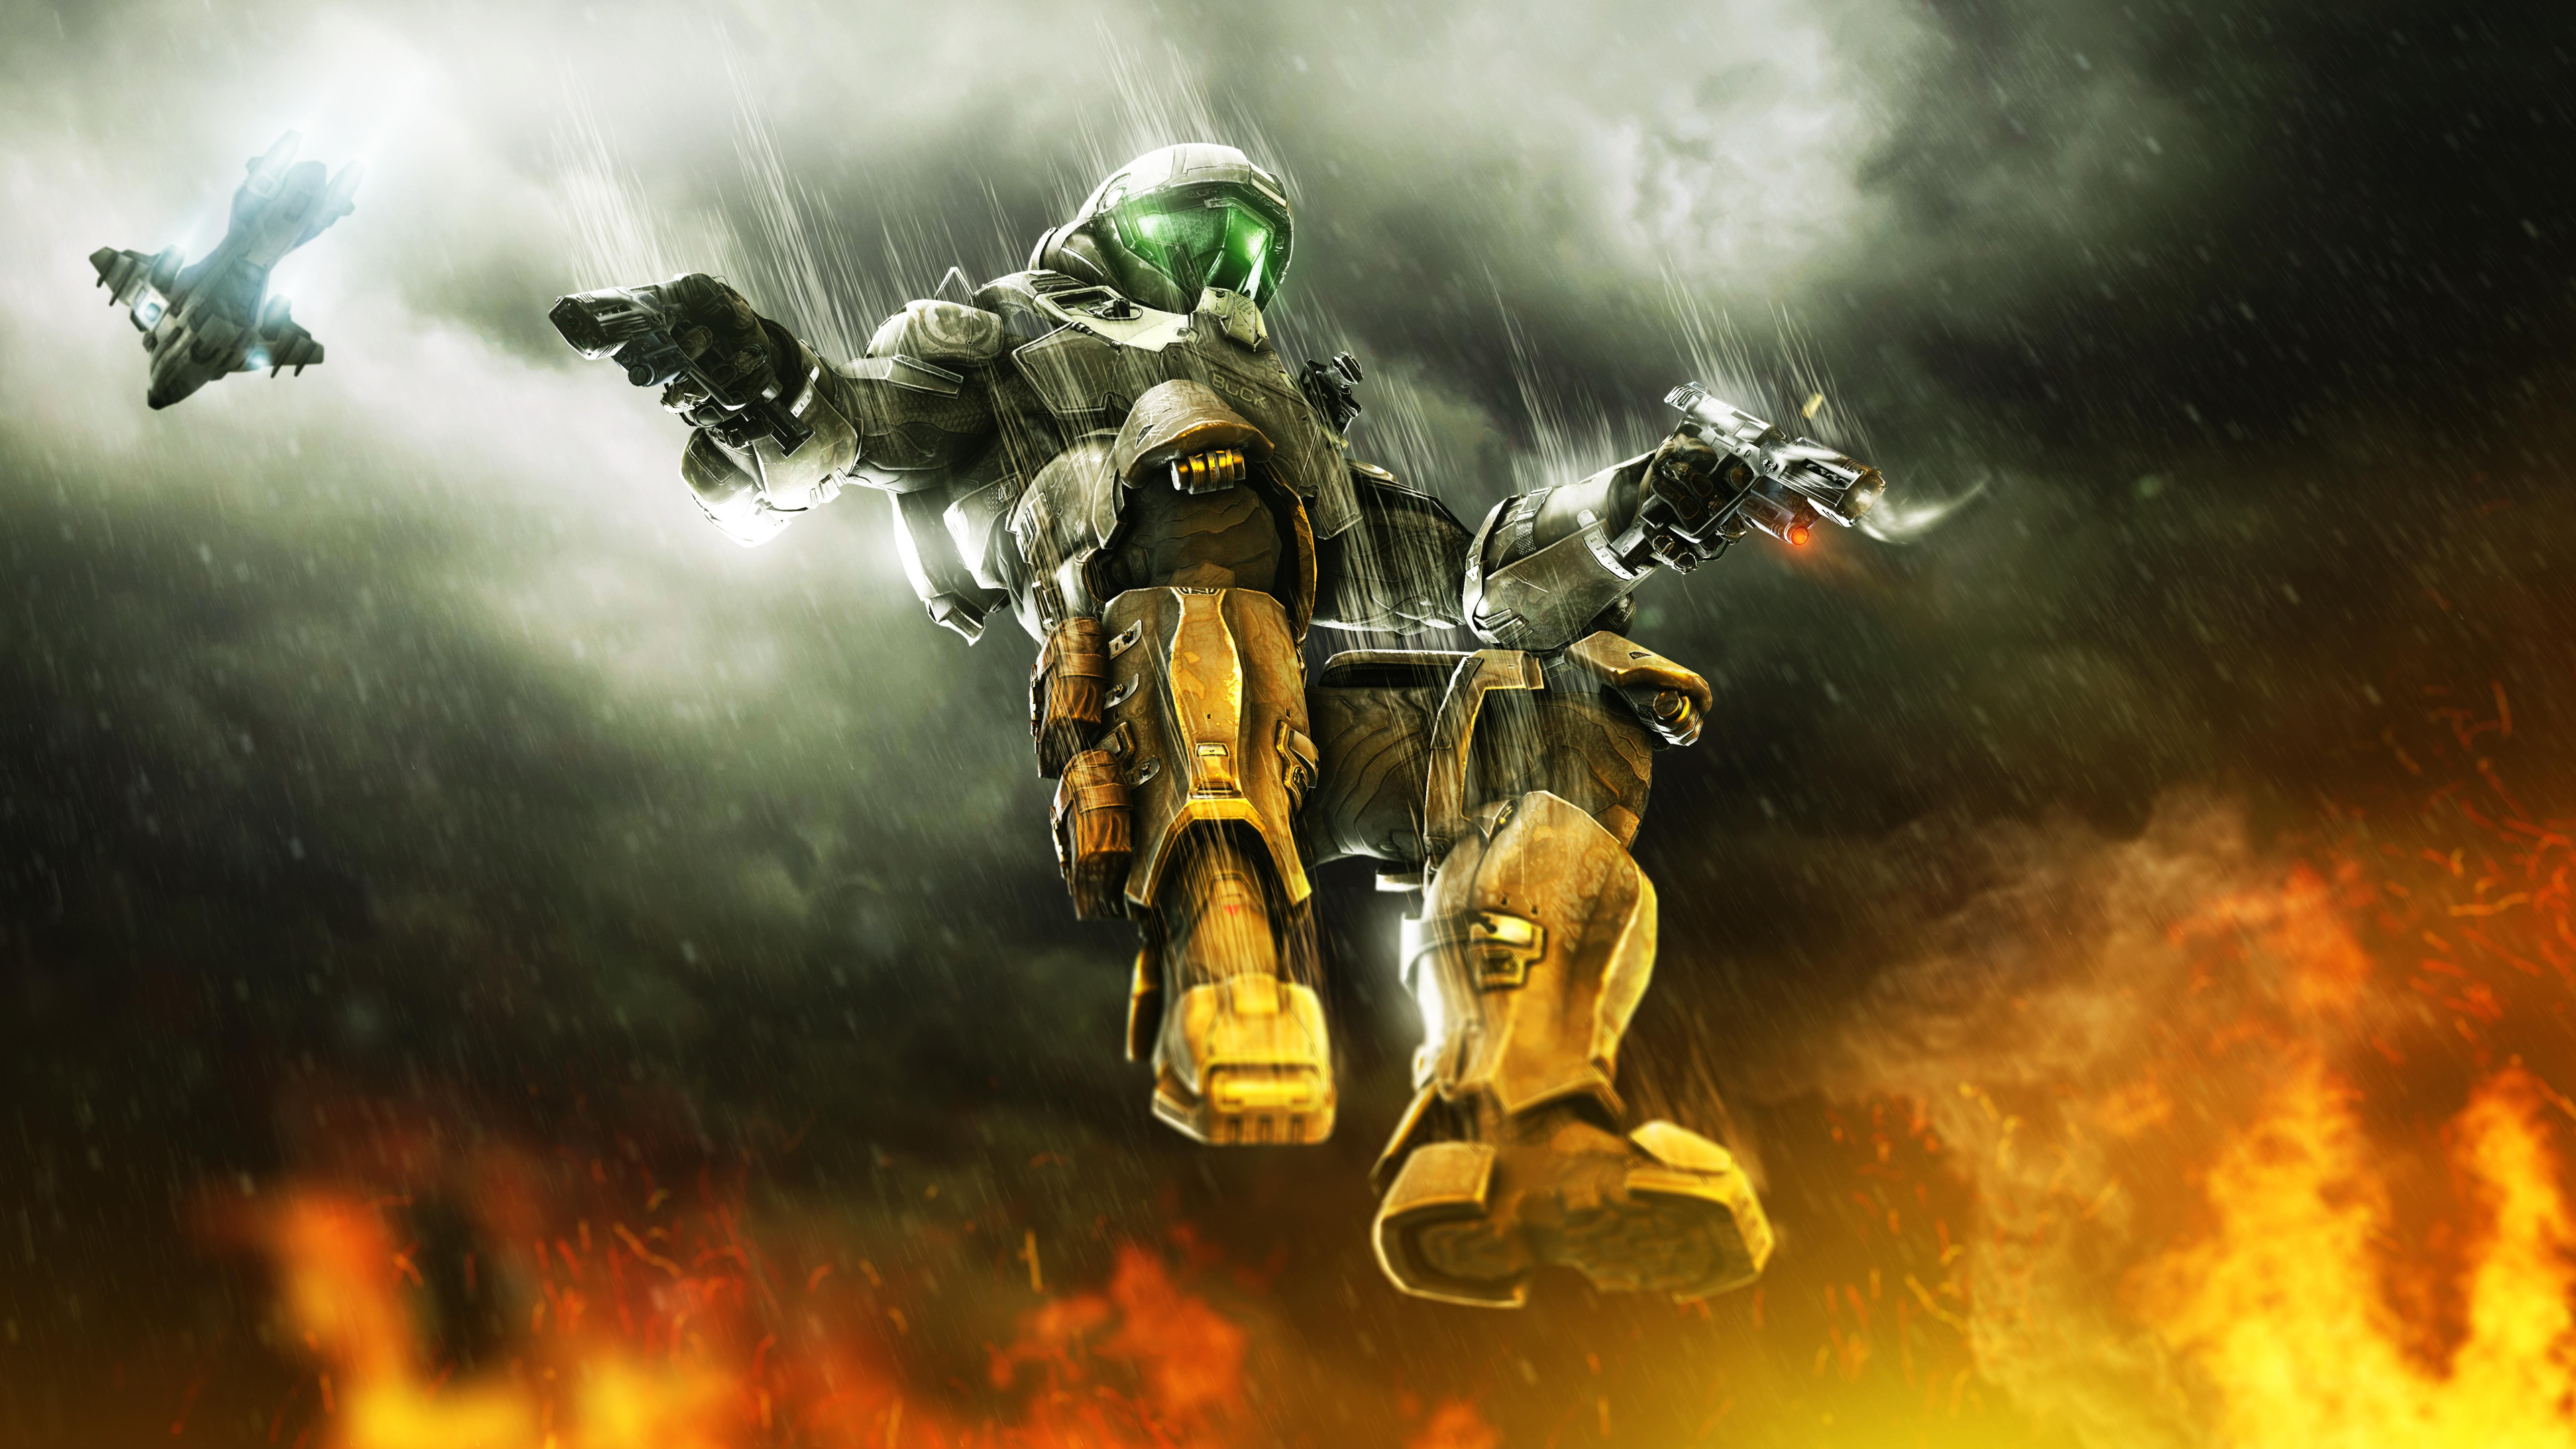 Halo 3, Master Chief, pc Game, Freestyle Motocross, Motocross. Wallpaper in 3840x2160 Resolution